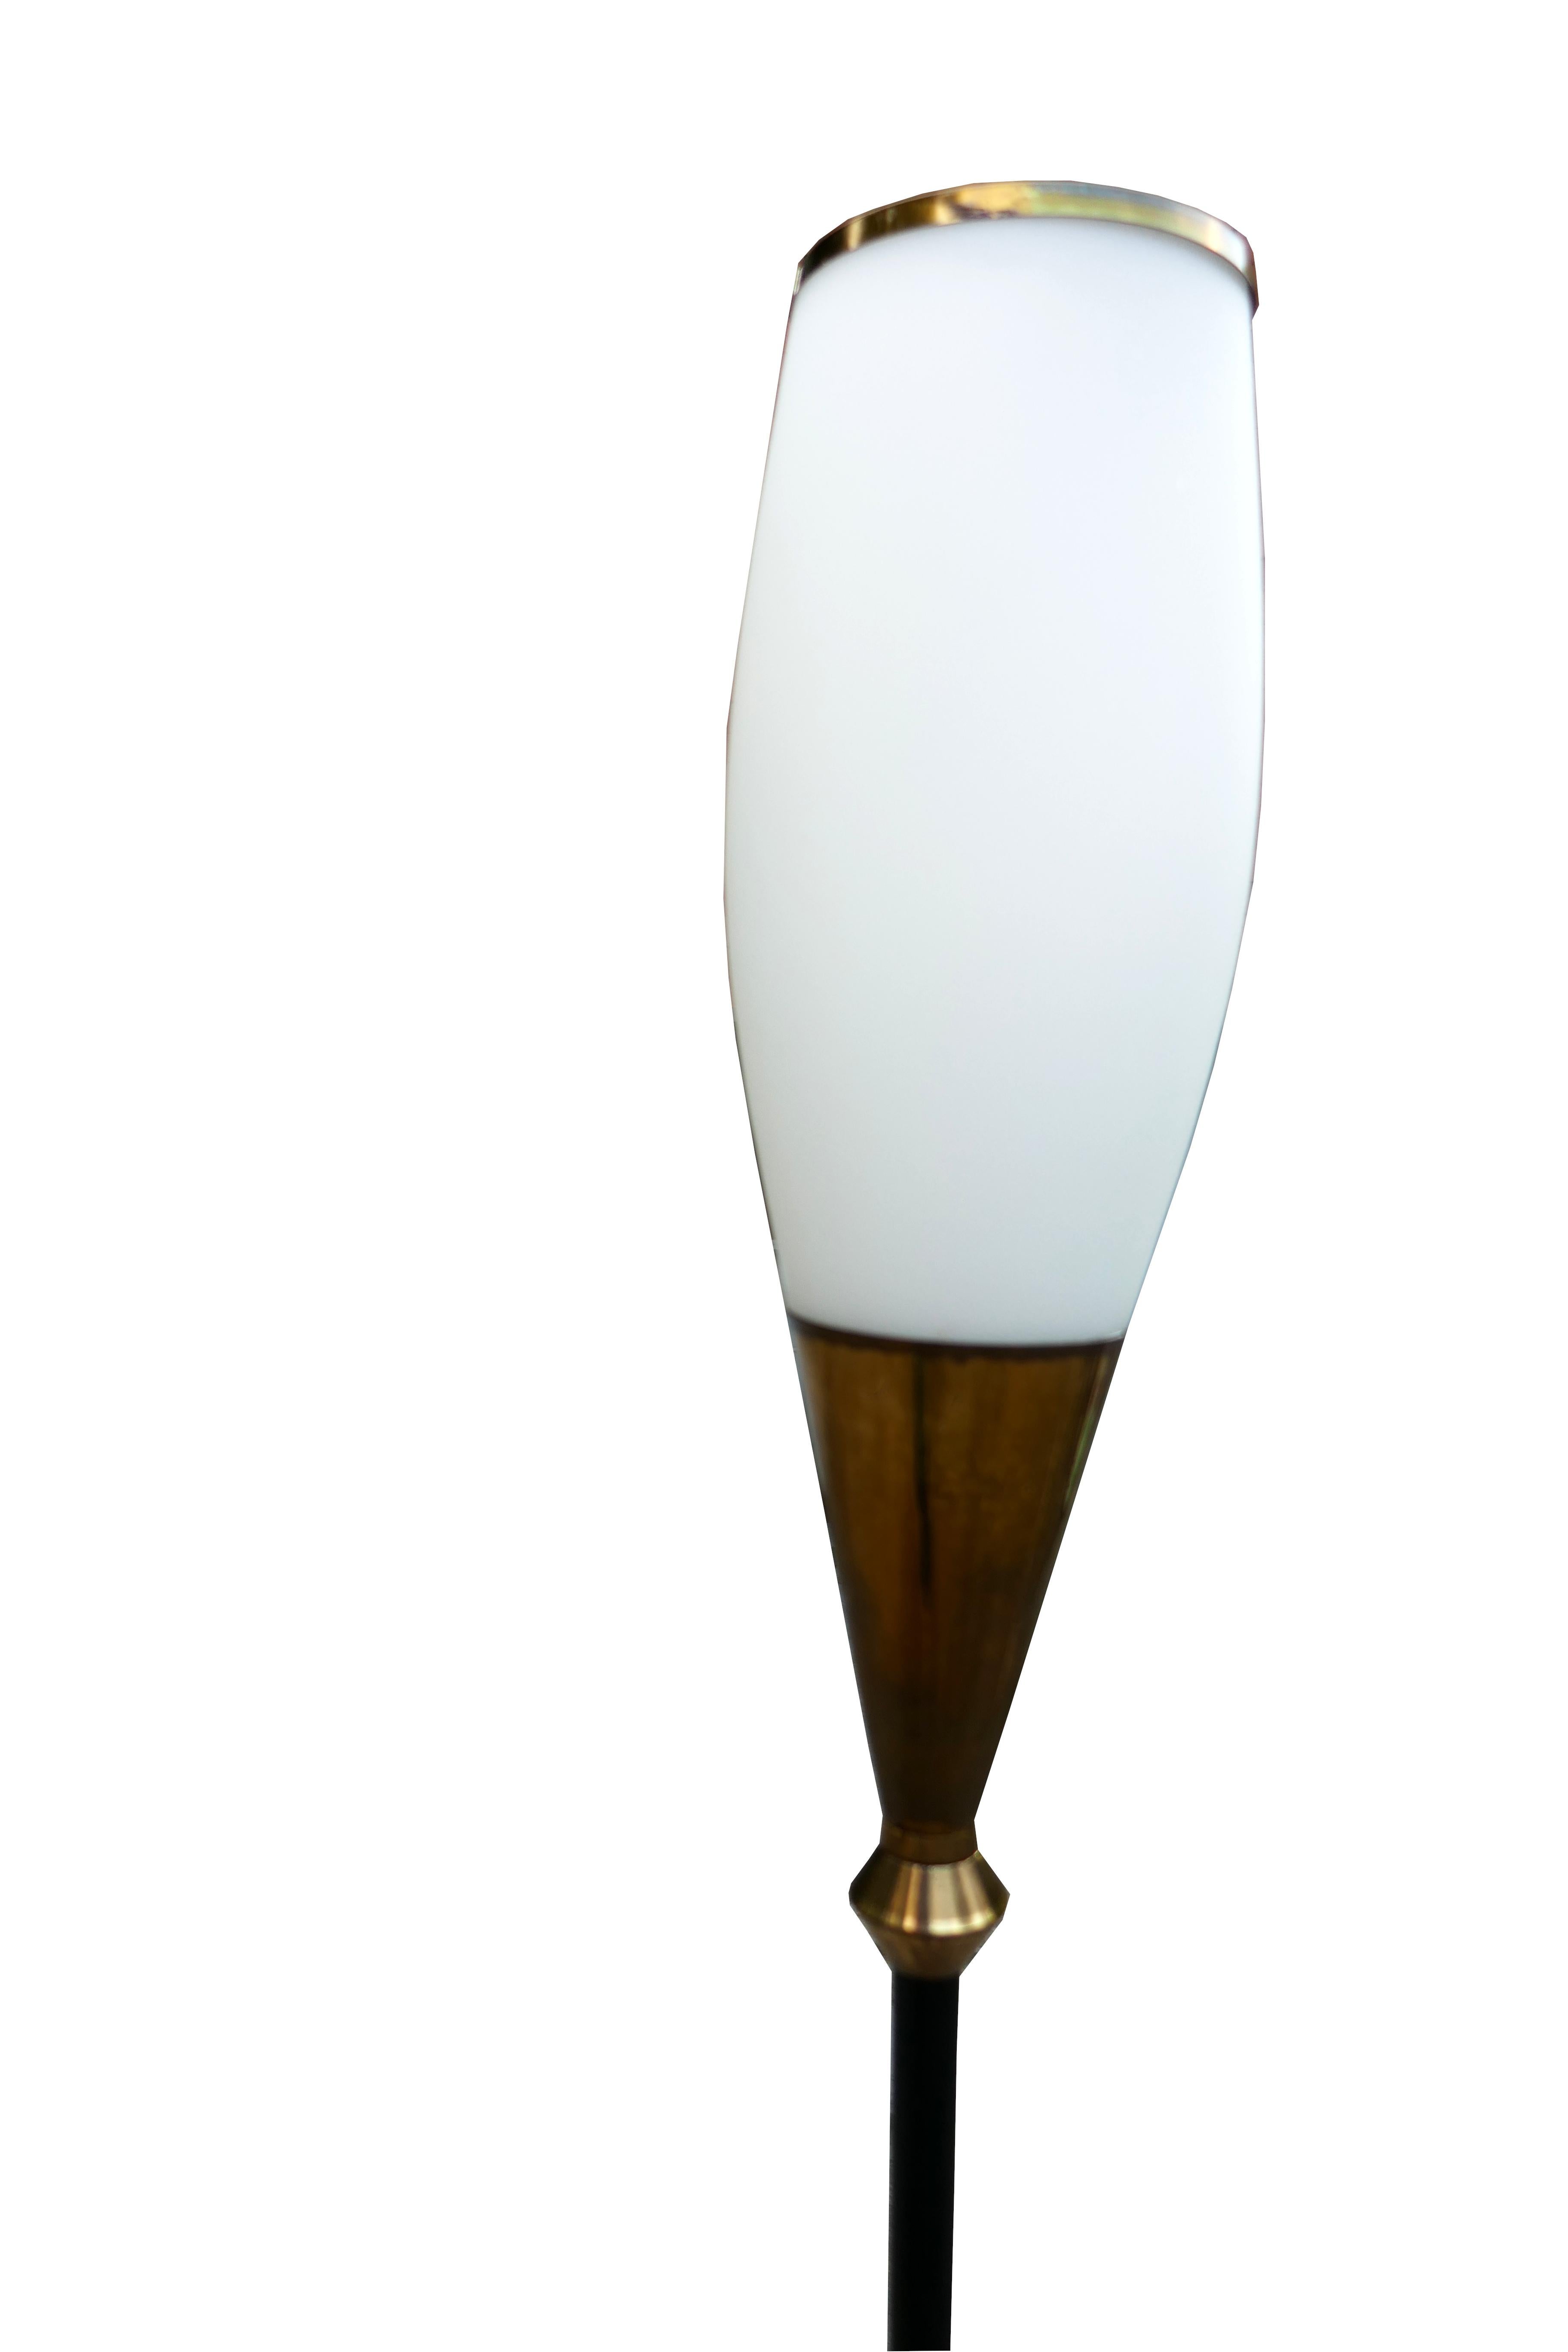 Floor lamp attributed to Stilnovo, 1960
Brass, marble, and opal glass.
Measures 103 cm by 11.5/25 cm
Good Condition
Thank you